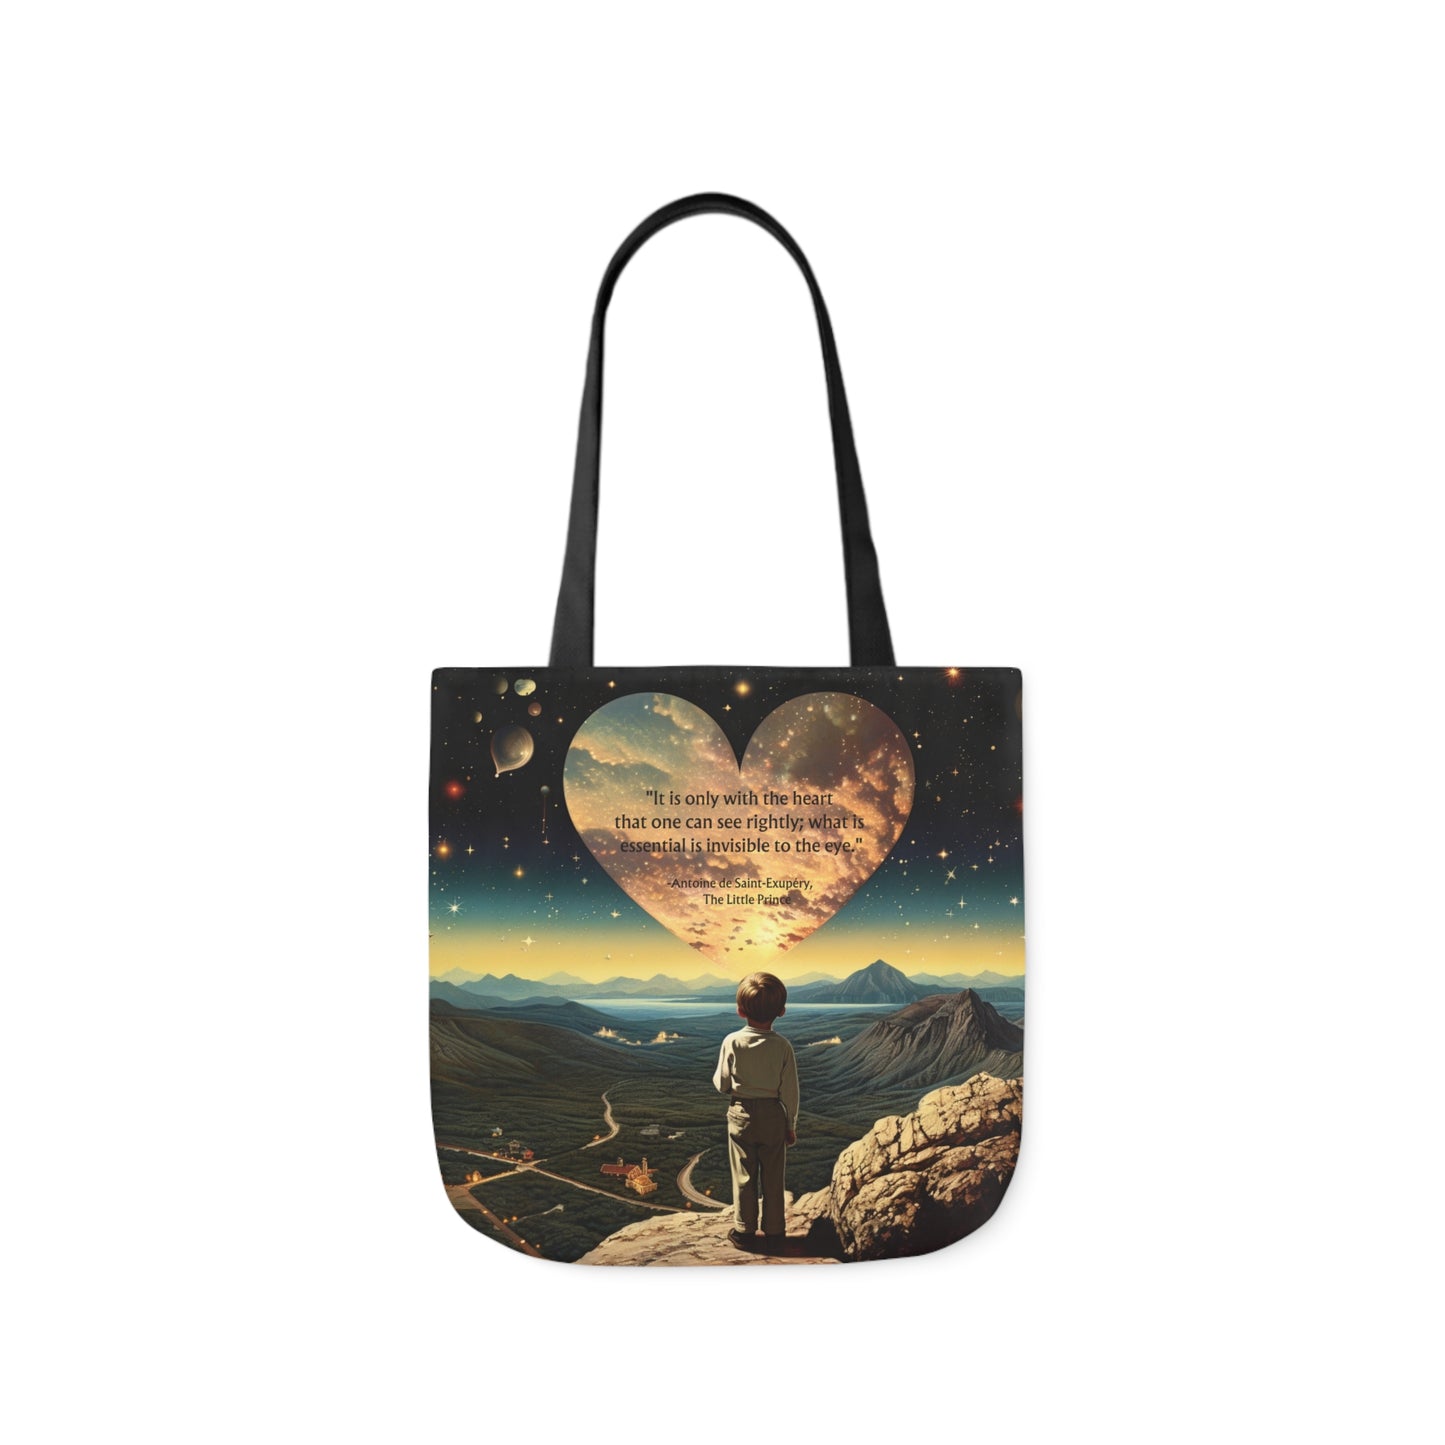 "It is only with the Heart" Little Prince Quote Tote Bag